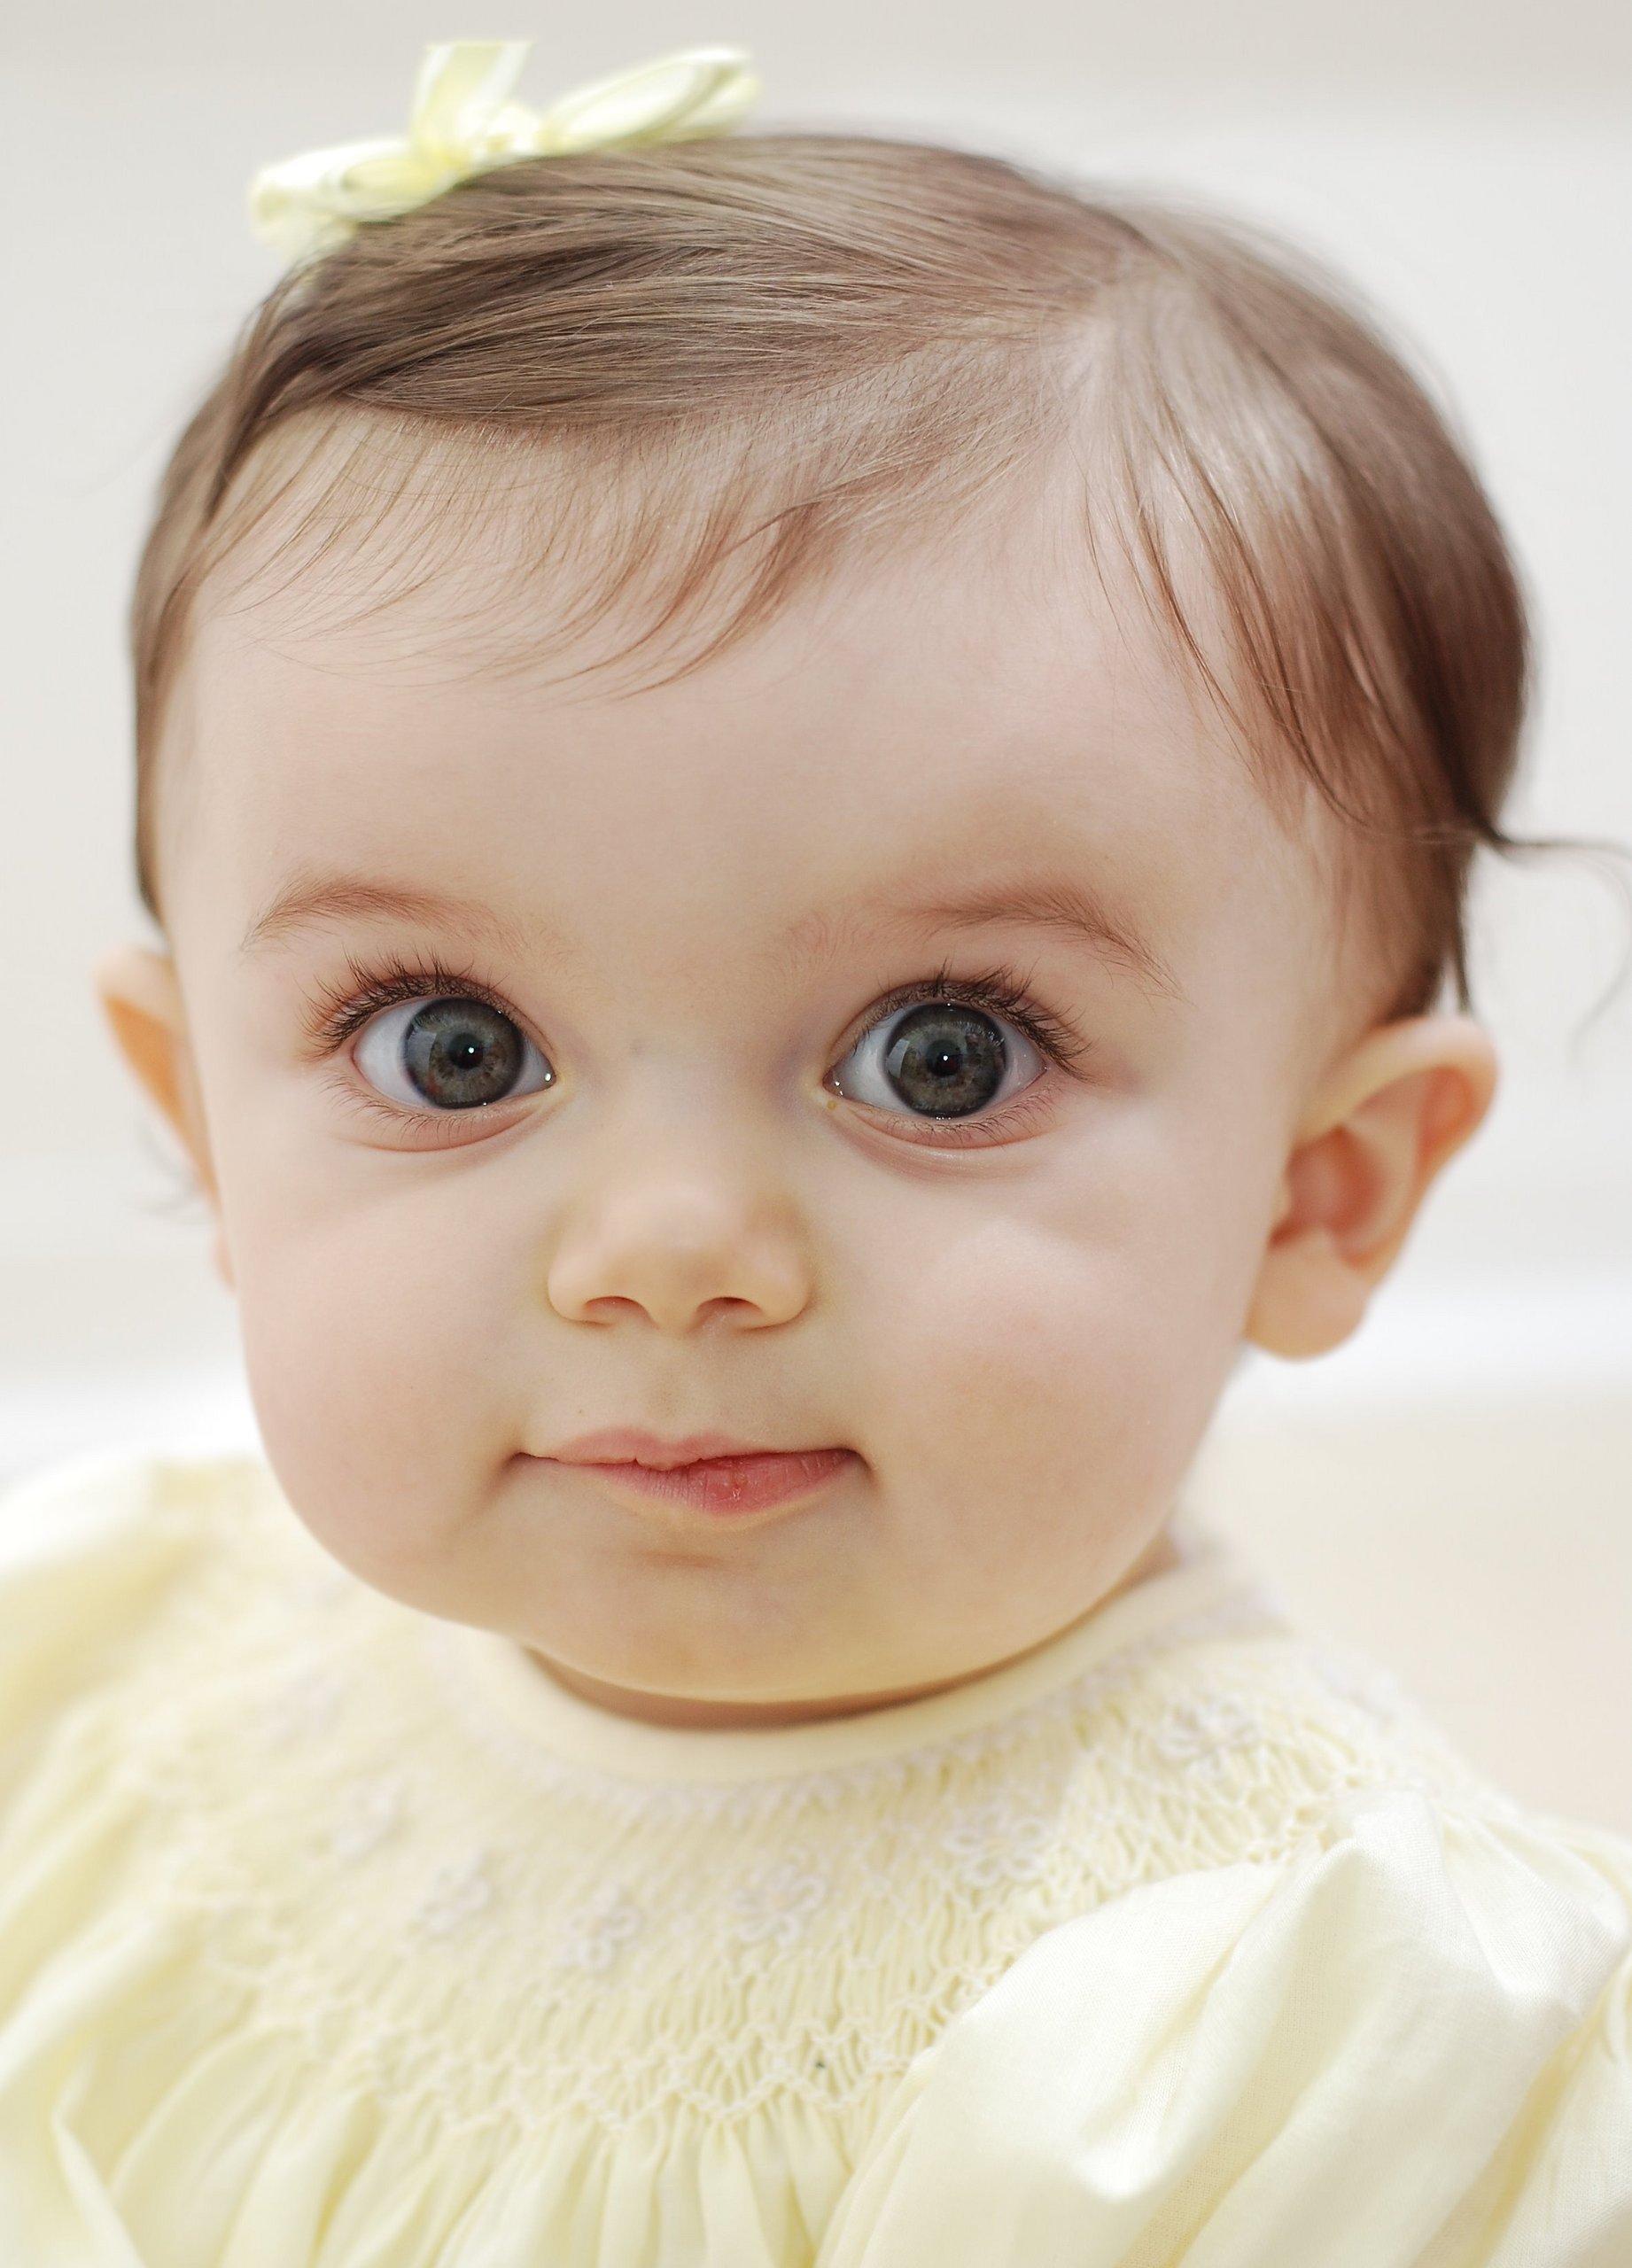 Babies Image Beautiful Eyes D HD Wallpaper And Background Photos